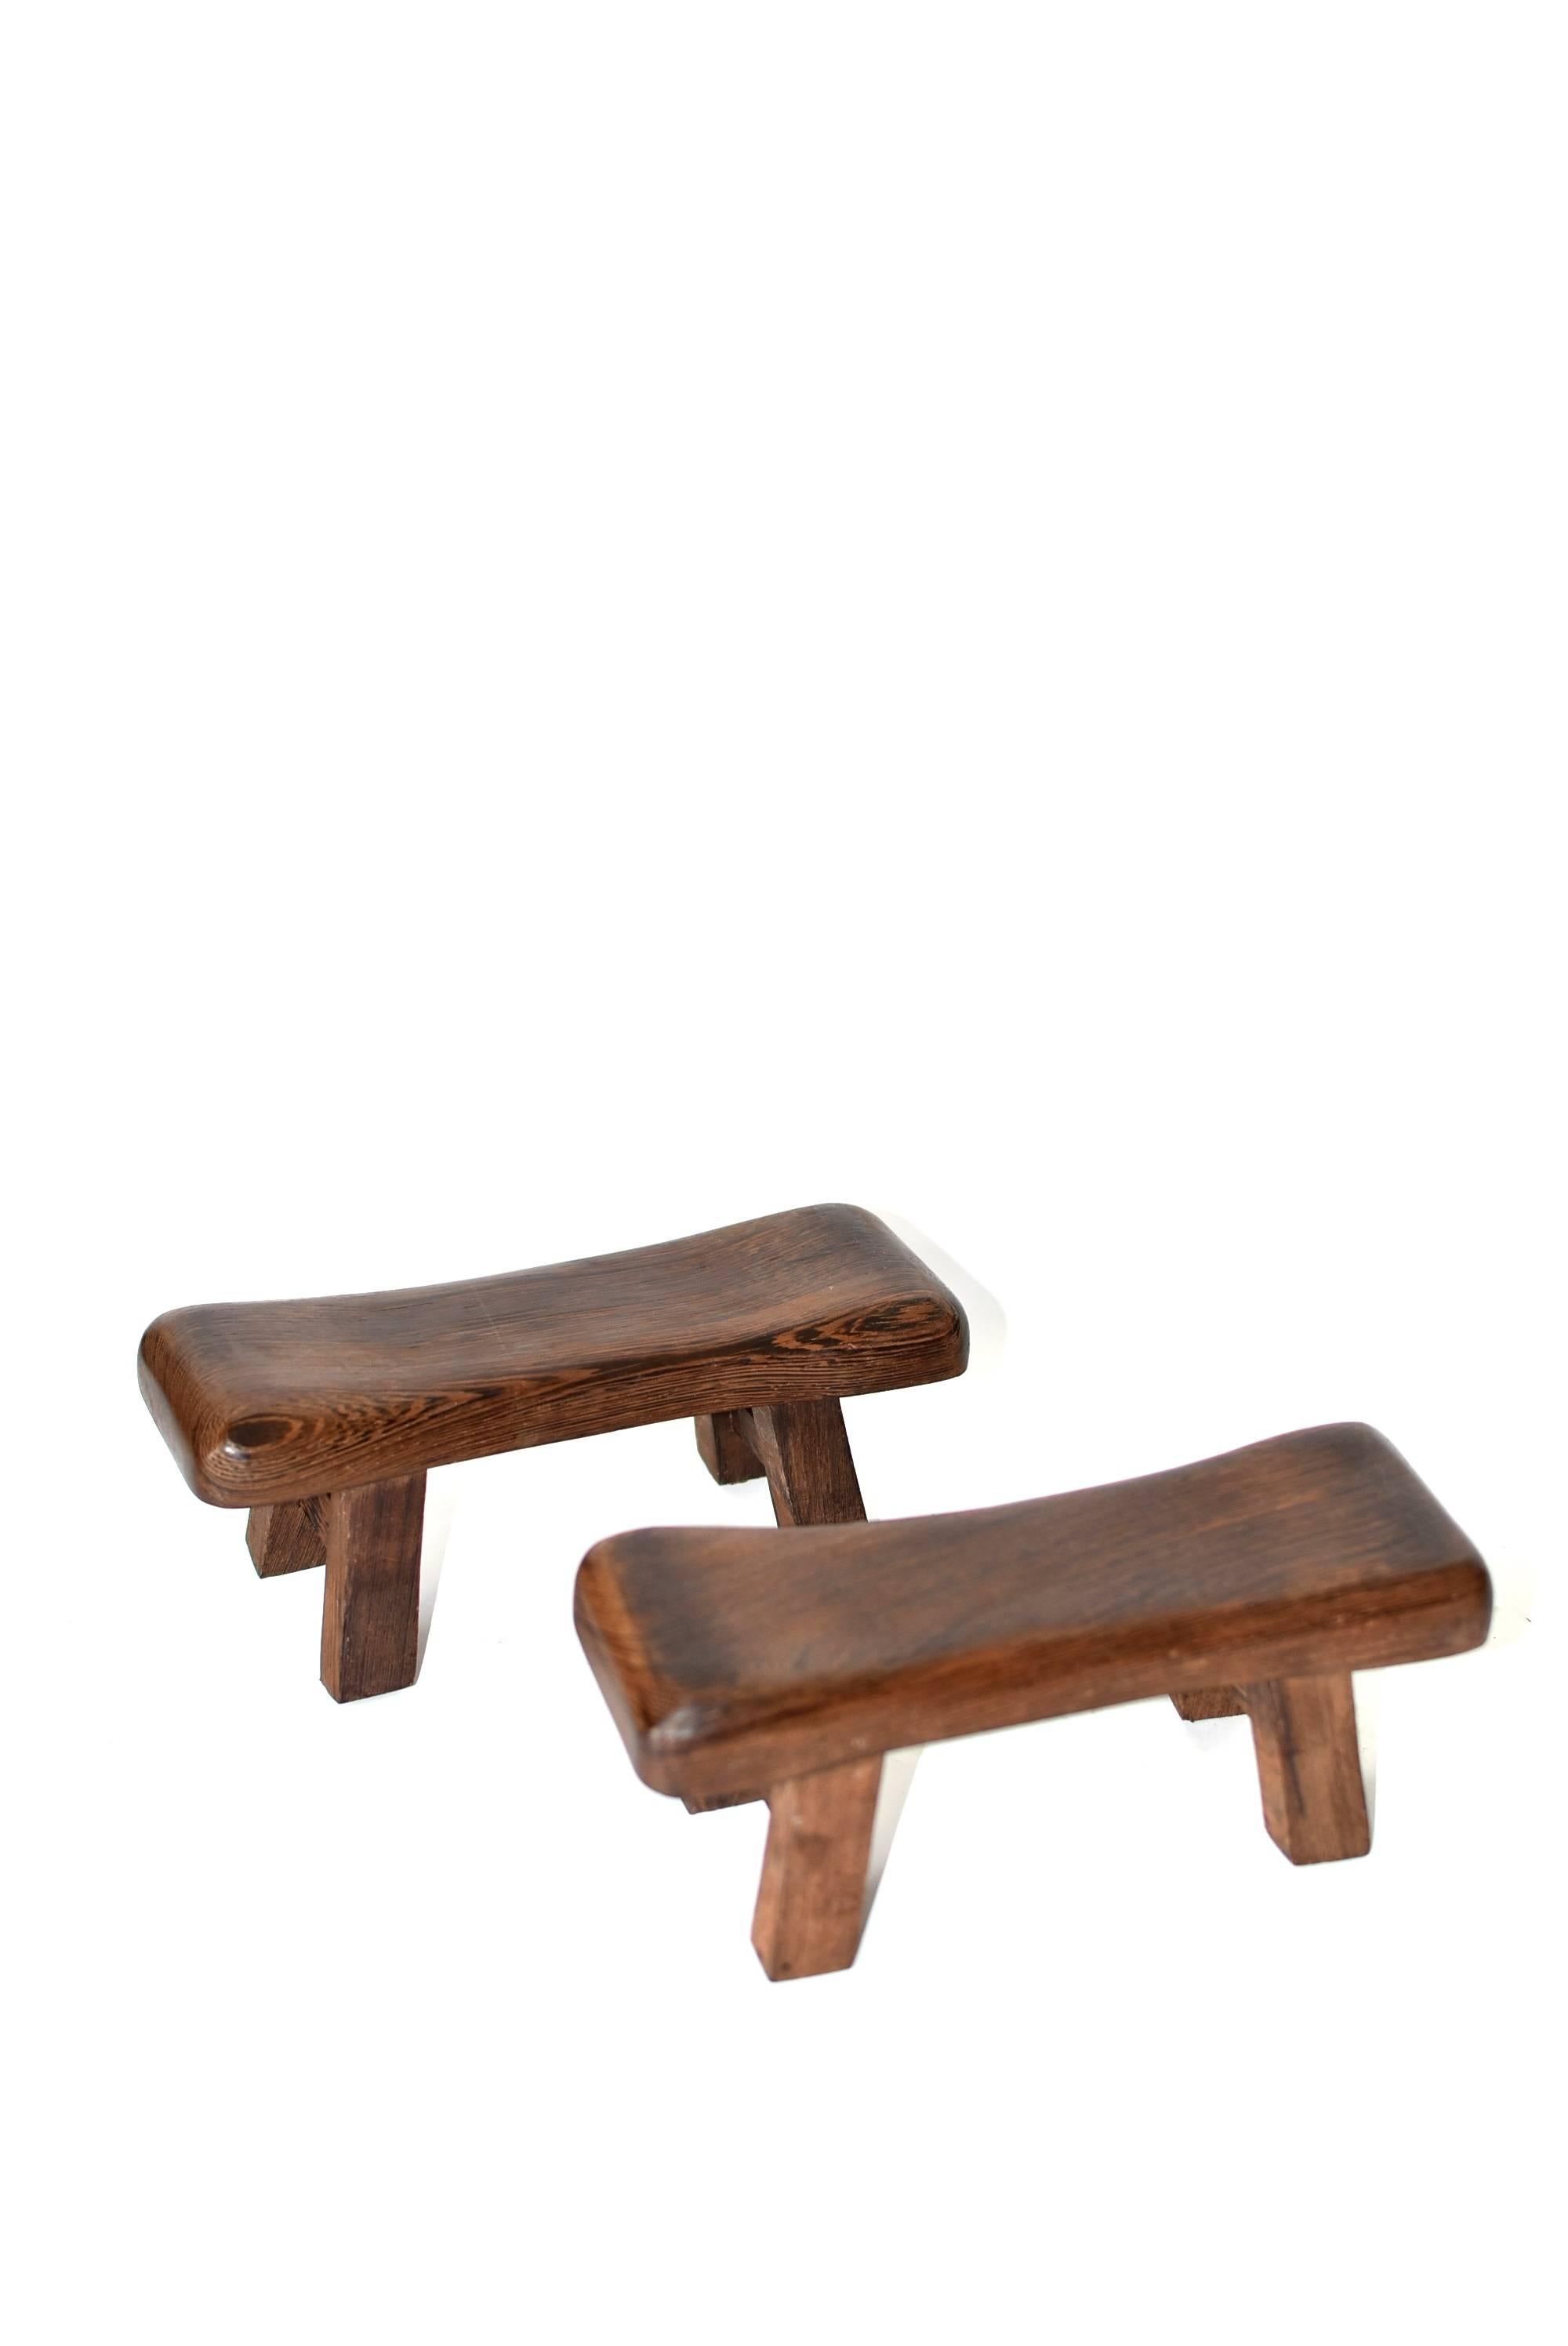 Beautiful miniature stools are made of the most spectacular wenge wood. This type of wood has very distinctive wood grains. It is highly prized for its density and scenic, romantic grain pattern. These stools can be used as headrest, hand rests in